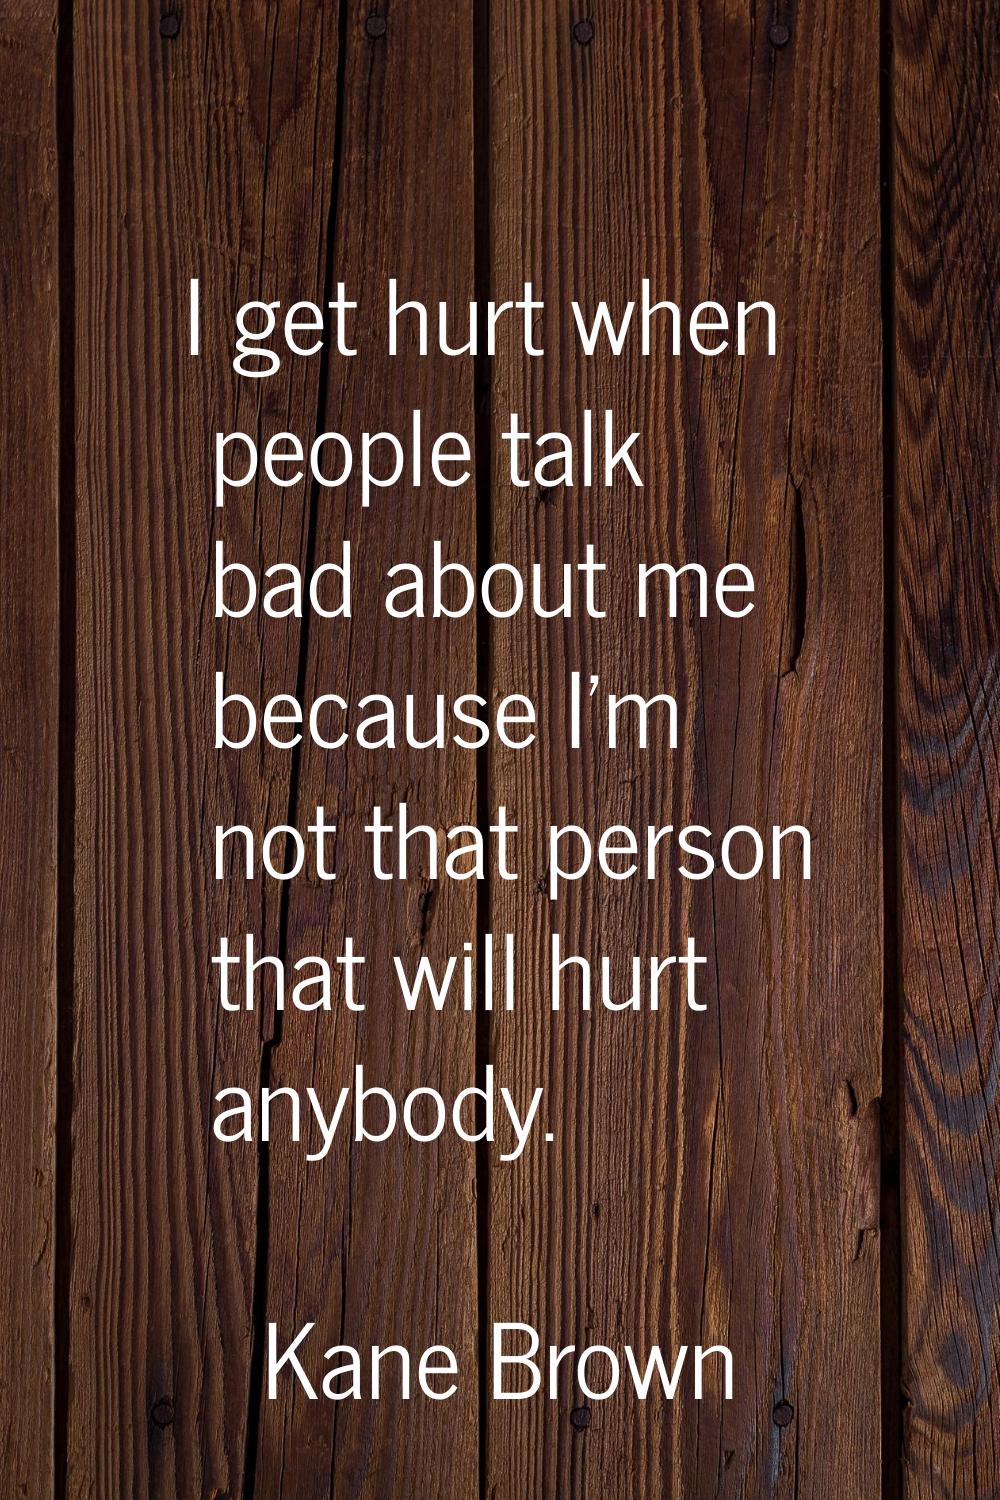 I get hurt when people talk bad about me because I'm not that person that will hurt anybody.